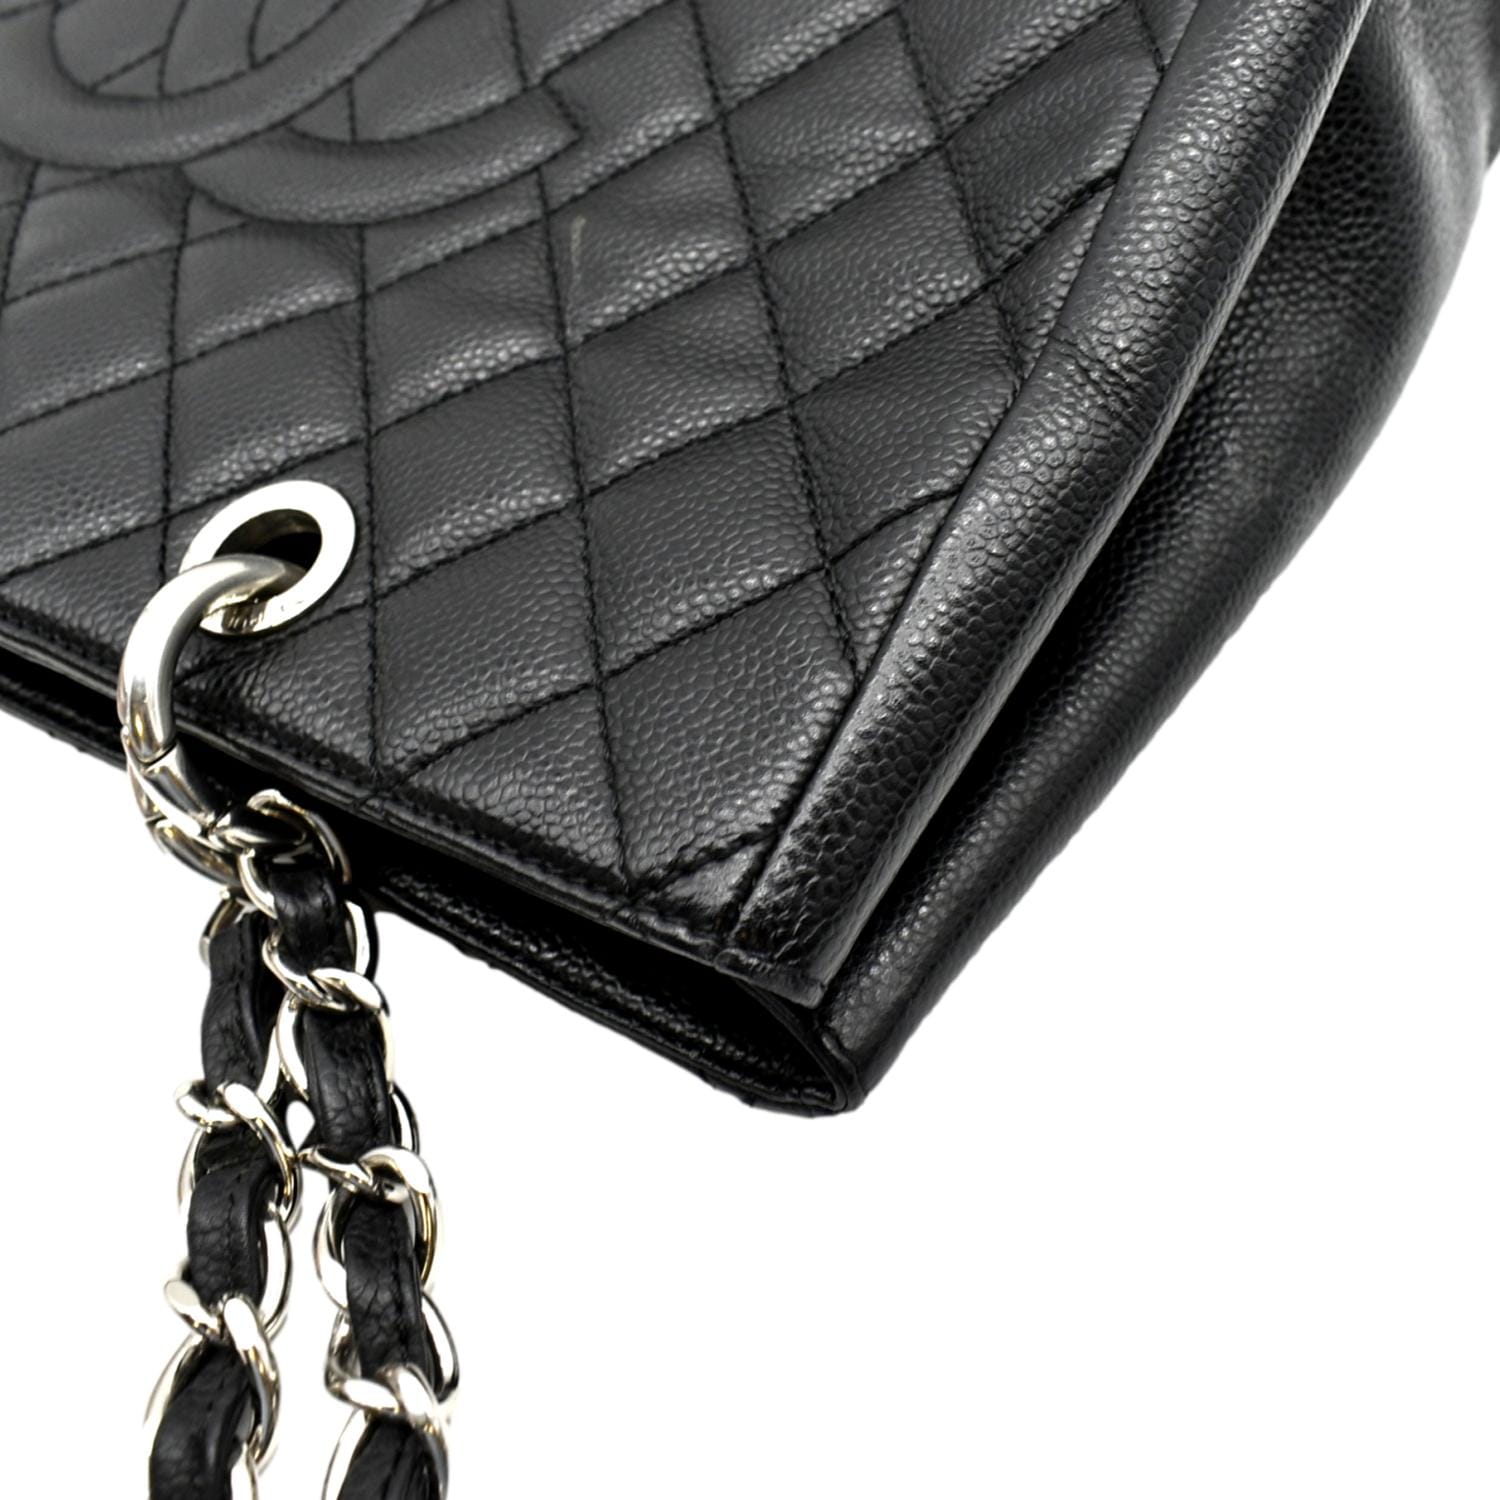 CHANEL Grand Shopping Quilted Caviar Leather GST Tote Bag Black